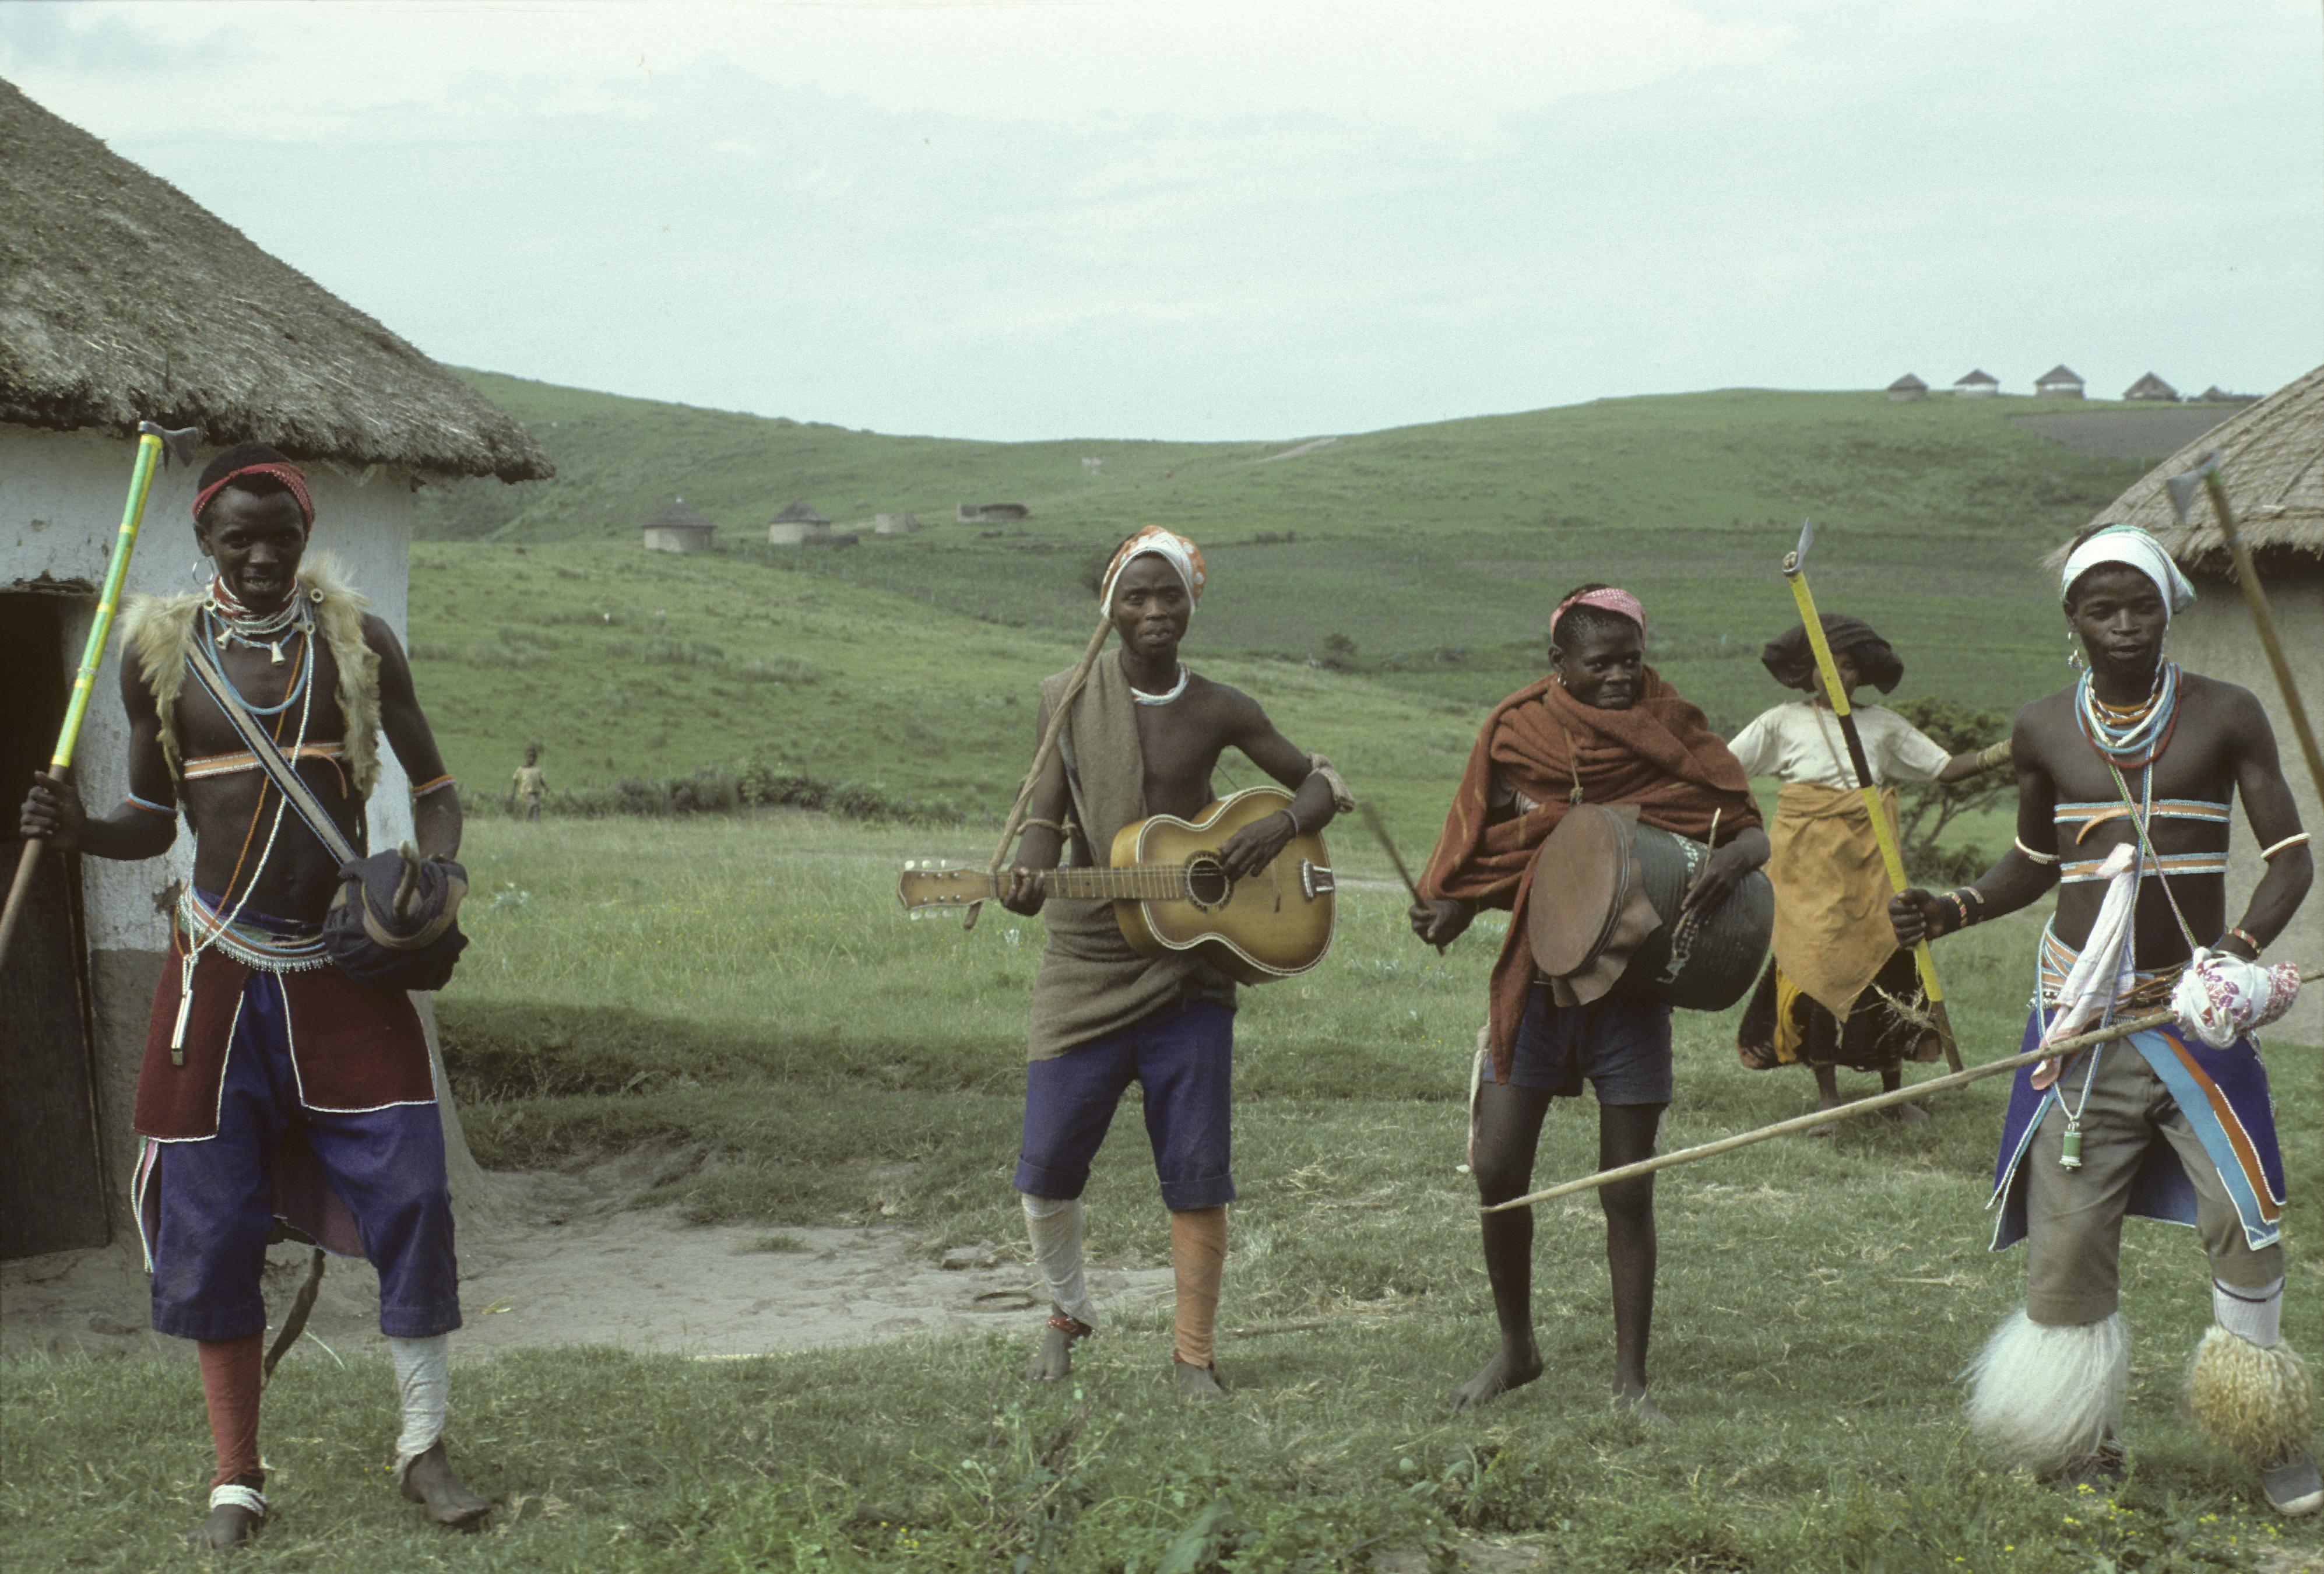 Southern Africa : Domestic Activities : games, stick-fighting - UWDC -  UW-Madison Libraries